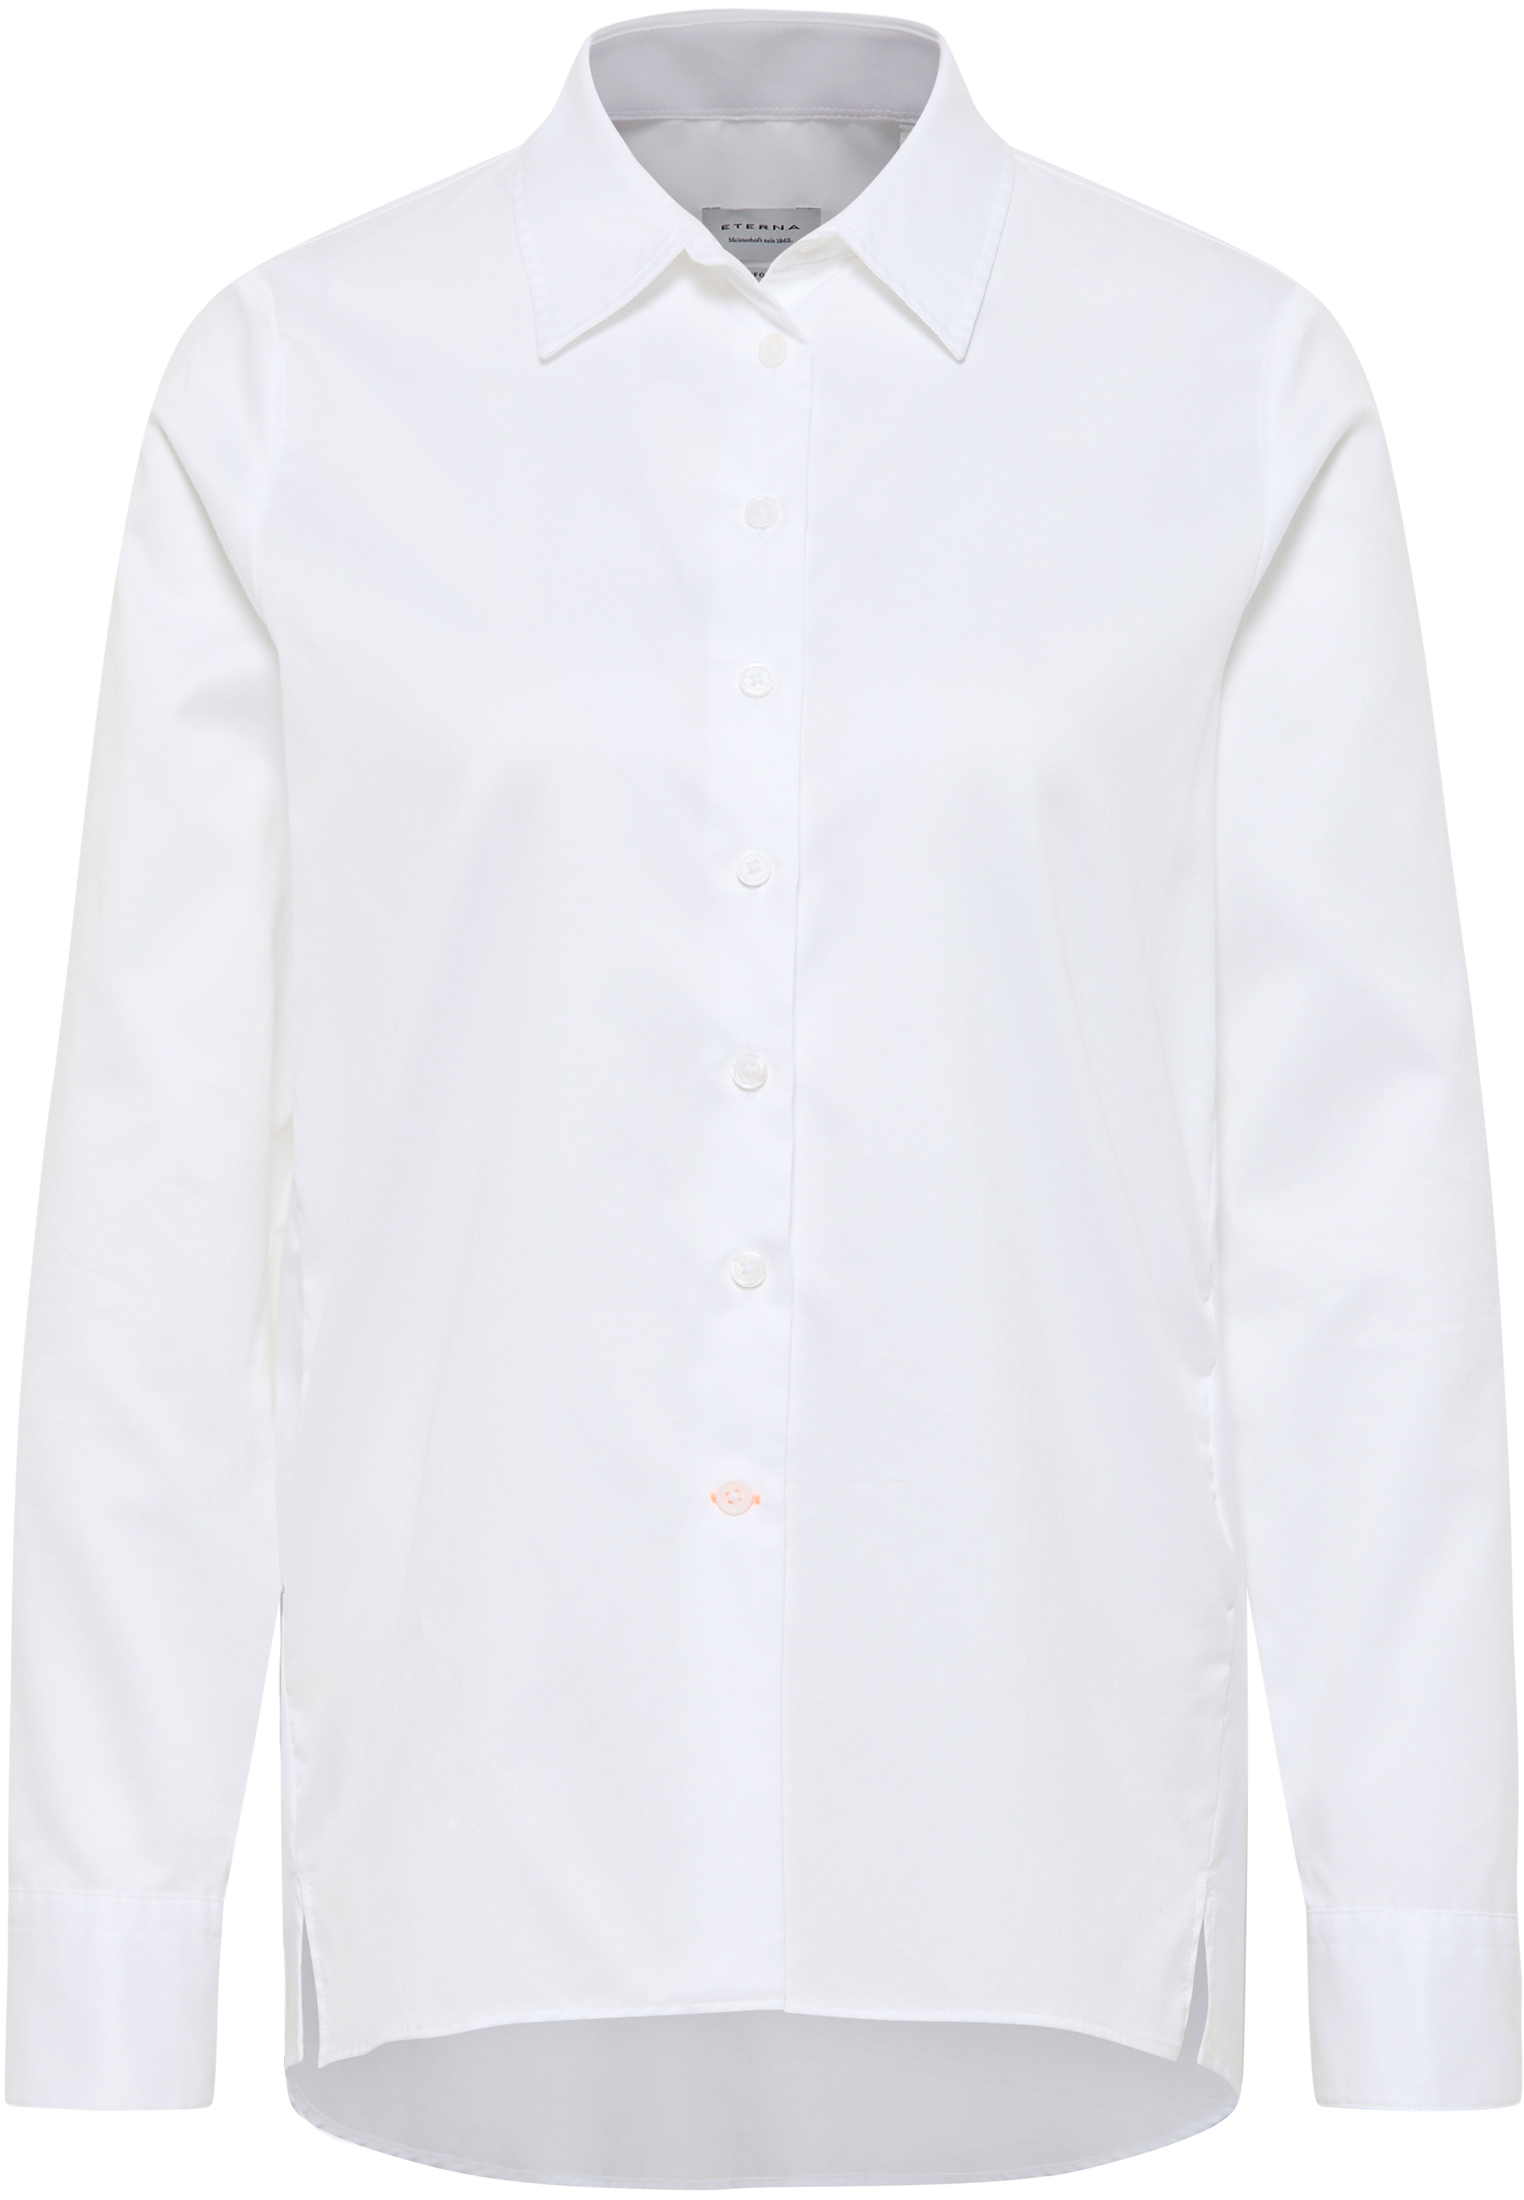 Soft Luxury Shirt Bluse in off-white unifarben | off-white | 34 | Langarm |  2BL00664-00-02-34-1/1